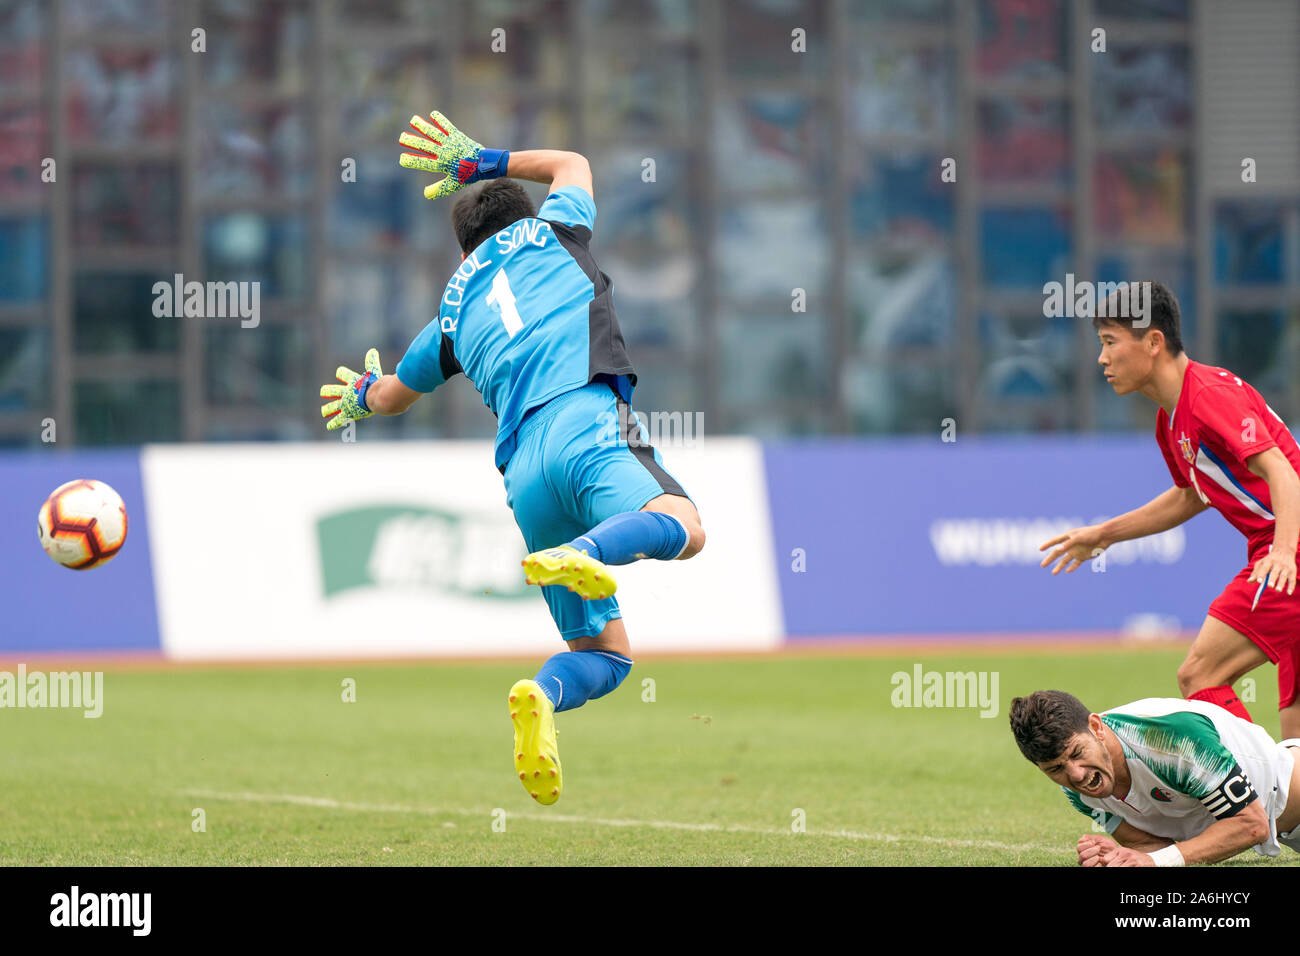 Wuhan, China. 27th Oct, 2019. Goalkeeper Ri Chol Song (L) of the Democratic People's Republic of Korea (DPRK) makes a save during the men's football bronze medal match between Algeria and the DPRK at the 7th International Military Sports Council (CISM) Military World Games in Wuhan, capital of central China, Oct. 27, 2019. Credit: Liu Jinhai/Xinhua/Alamy Live News Stock Photo